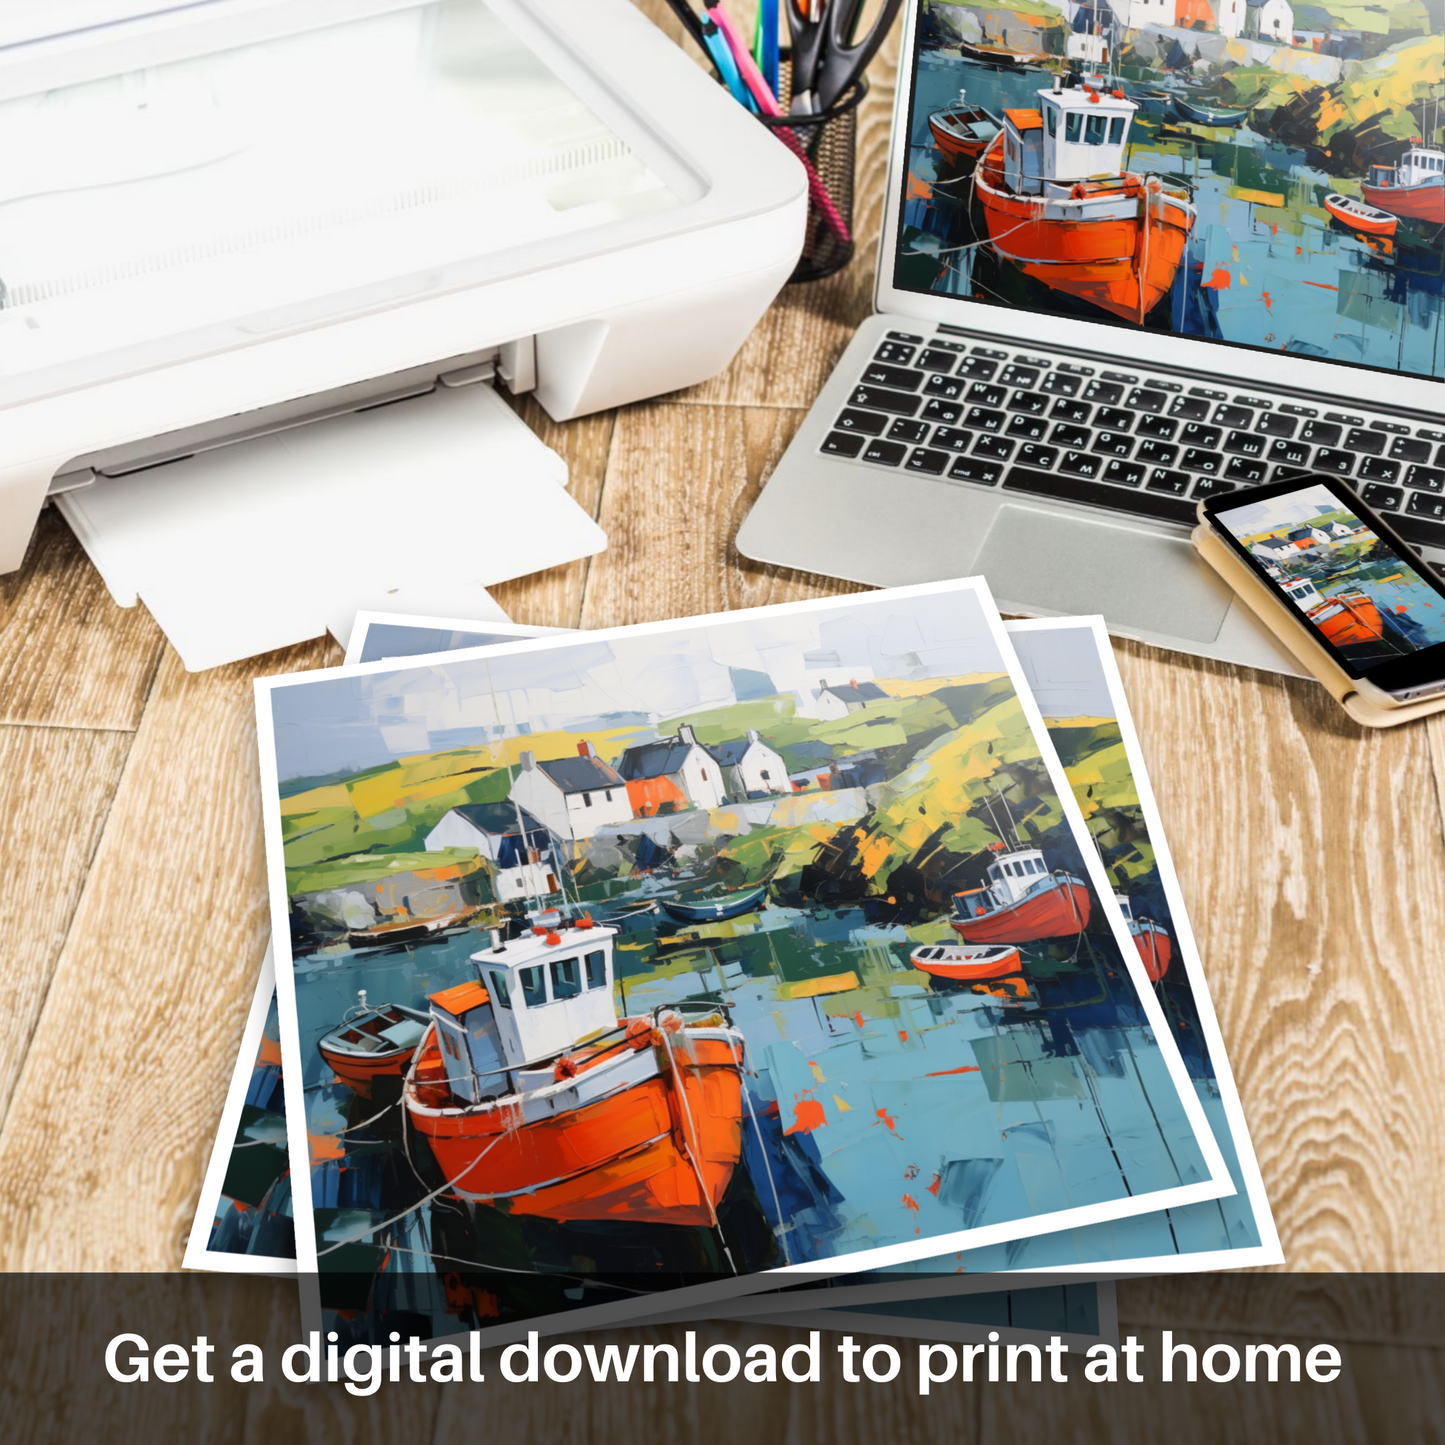 Downloadable and printable picture of Portnahaven Harbour, Isle of Islay